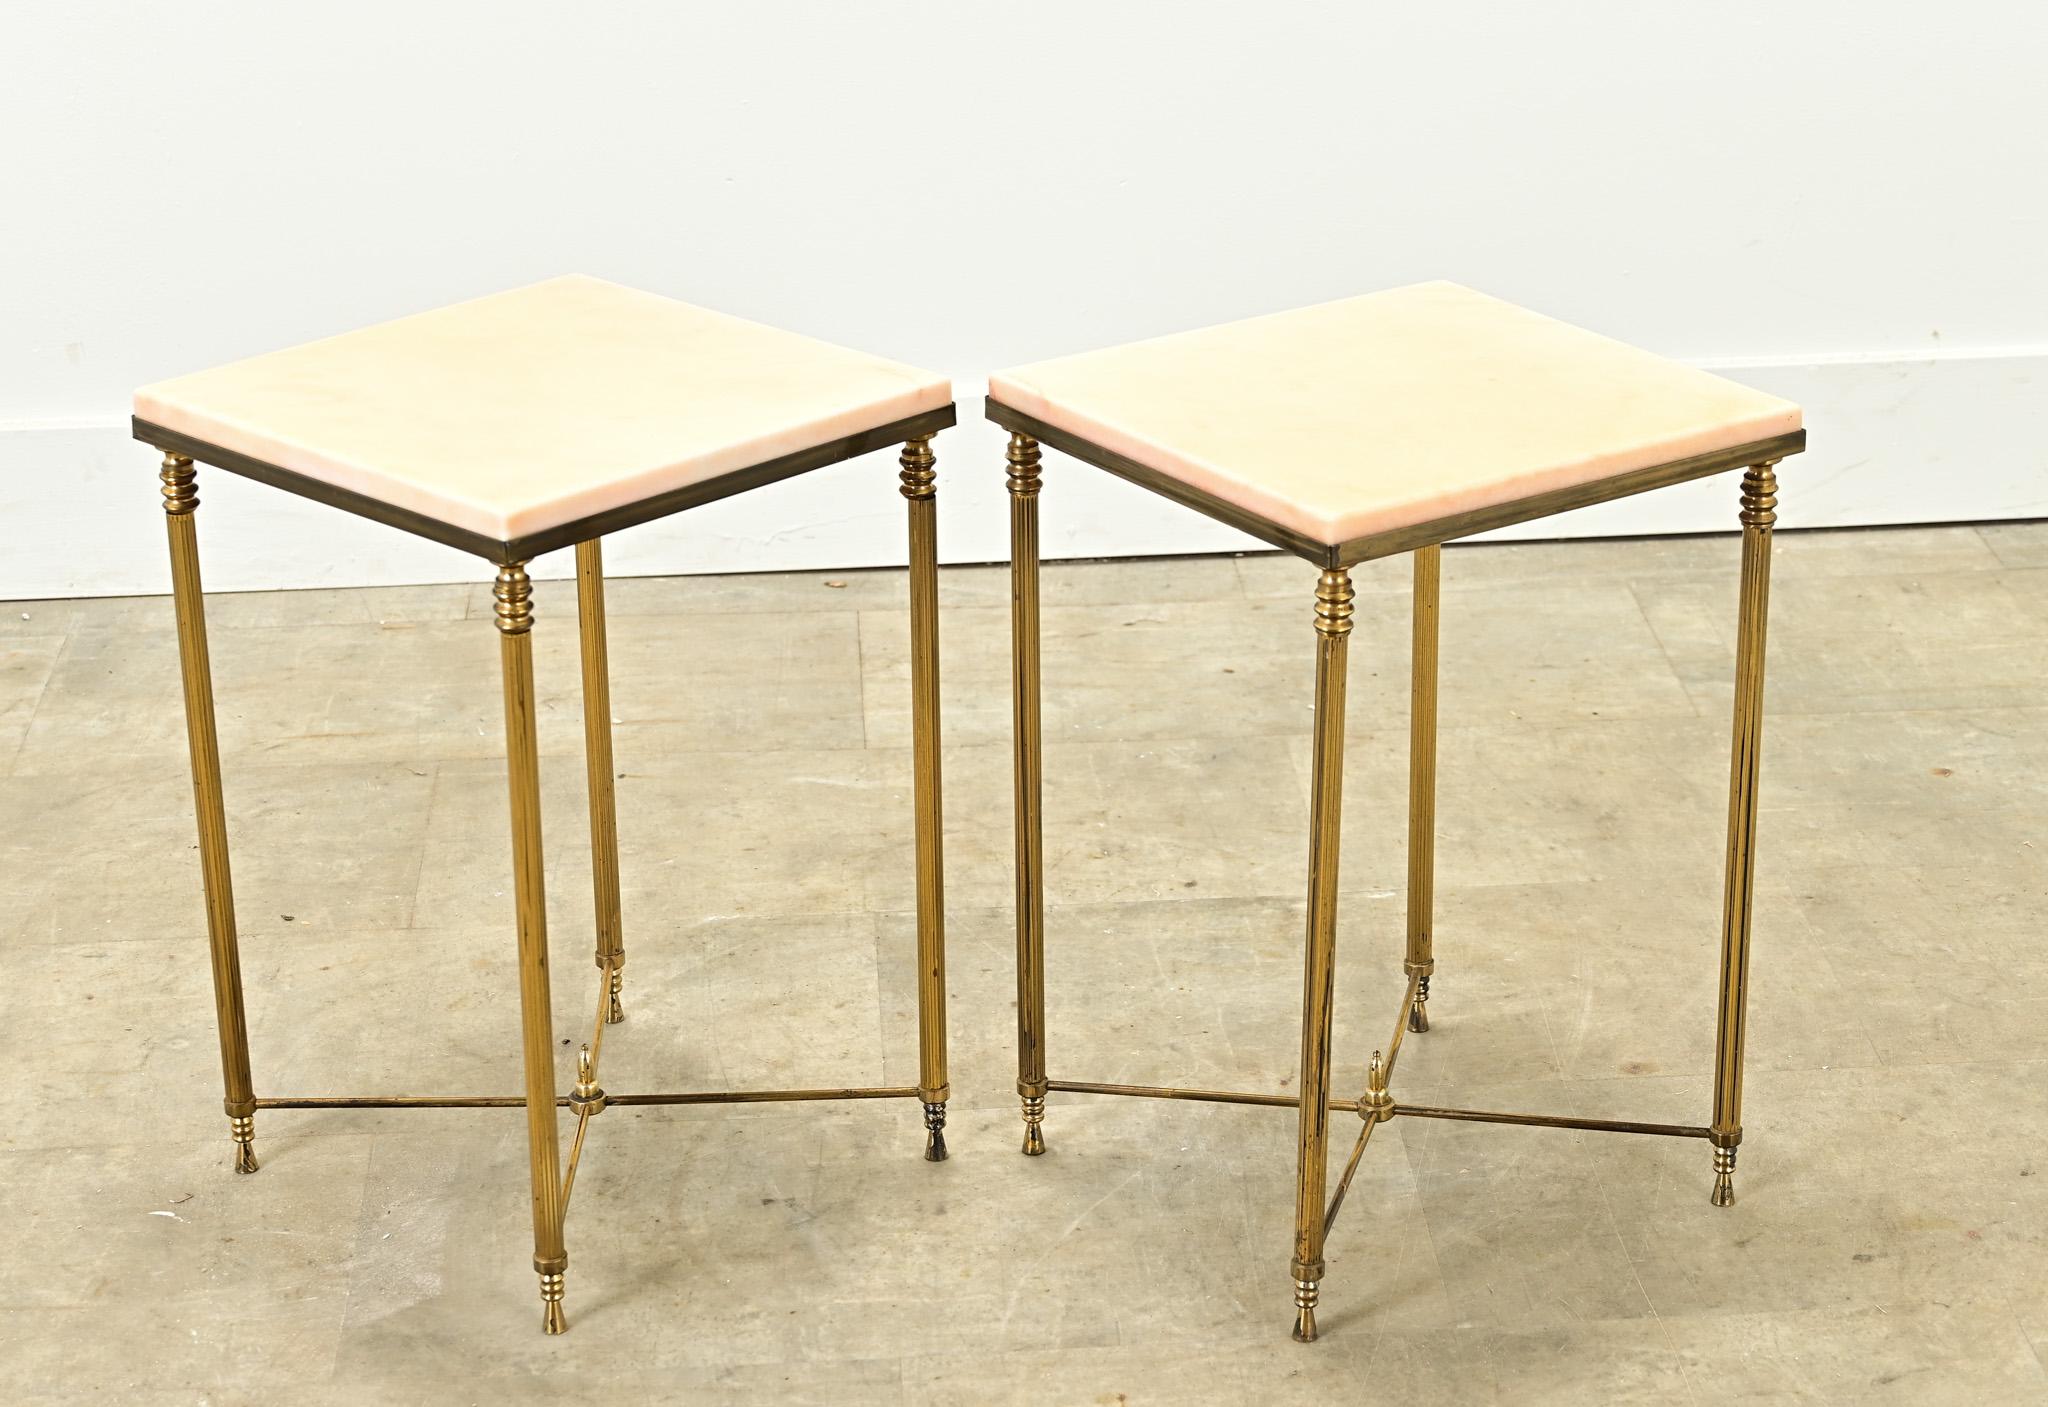 This vintage pair of French brass and faux marble tables are perfect side tables for your interior. The faux marble tops rest over fluted brass bases. Be sure to view the detailed images to see the current condition.